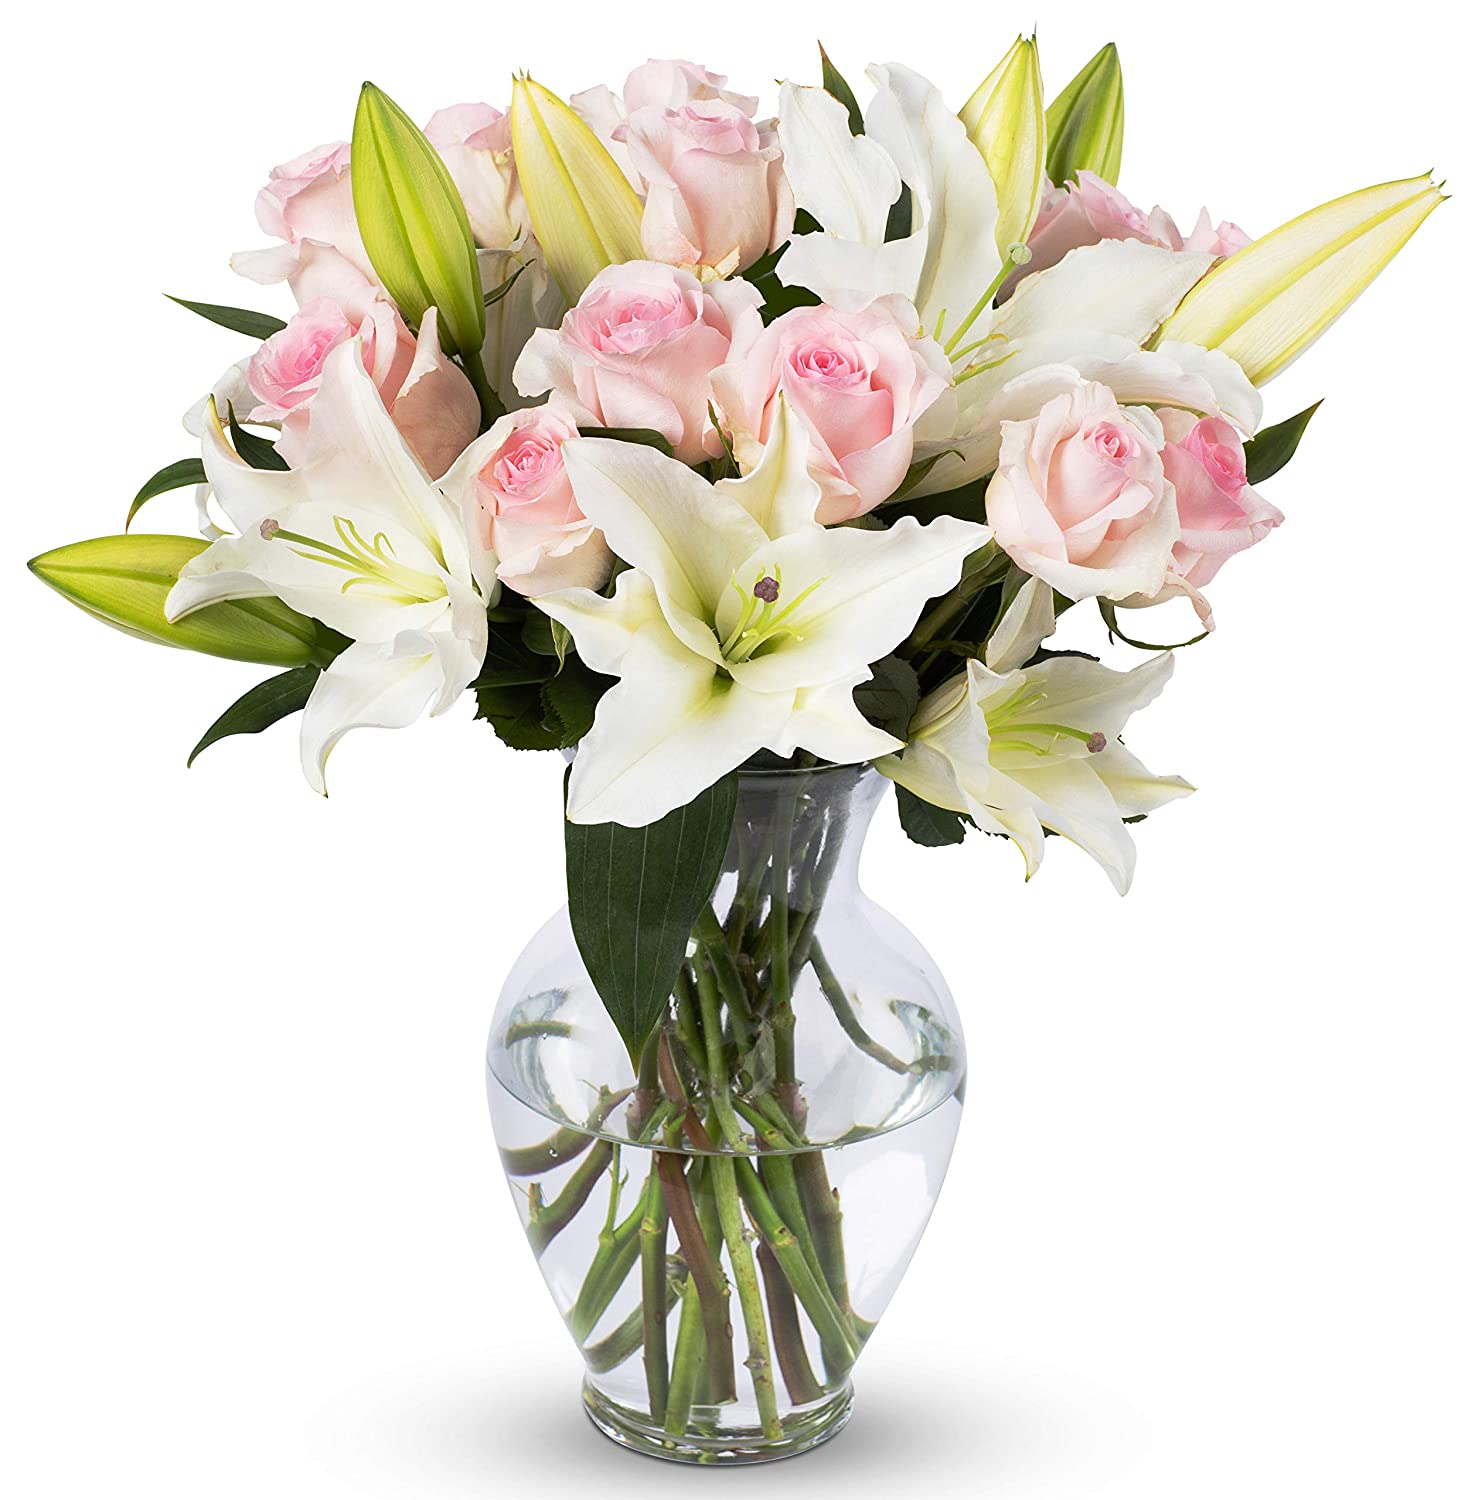 Benchmark Bouquets Glass Vase Lilies & Roses Fresh Cut Flowers, 17-Count